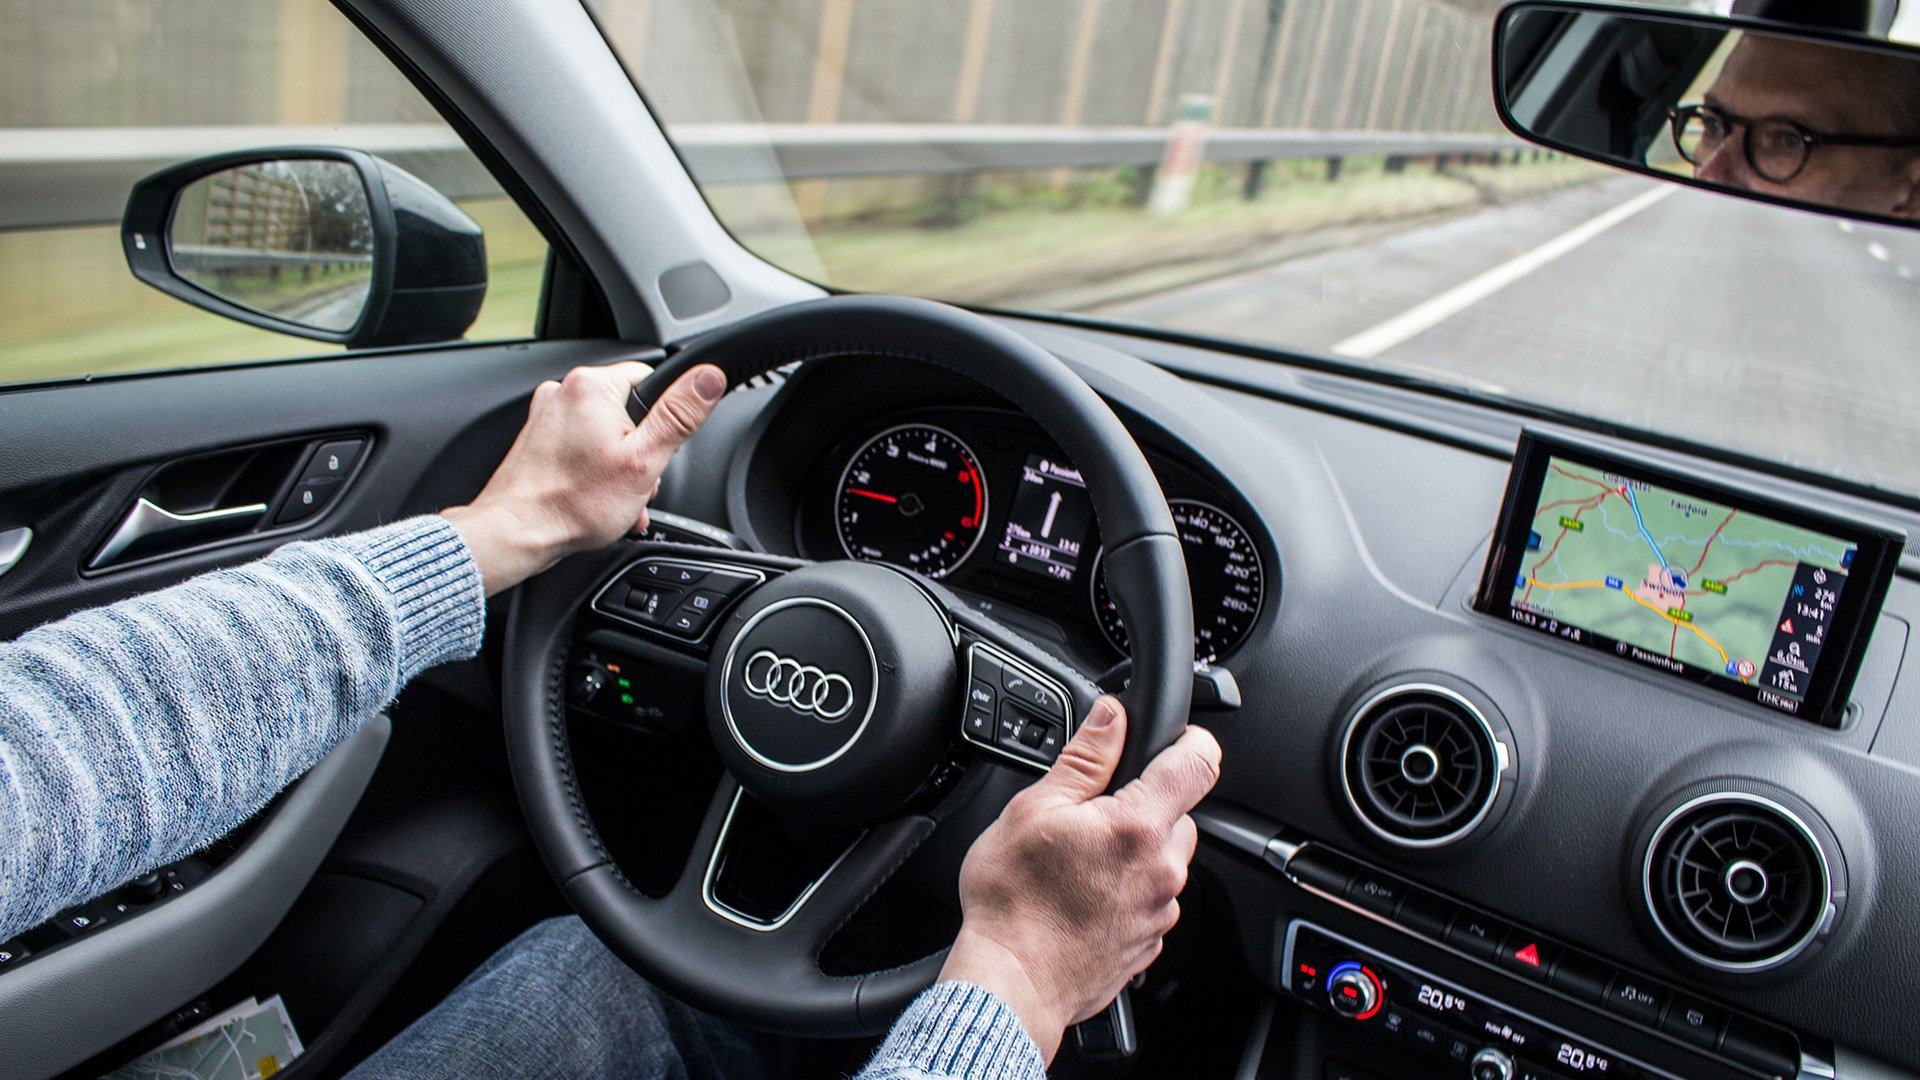 A middle aged man in a sweater driving an Audi in what looks like a moderately cloudy place.